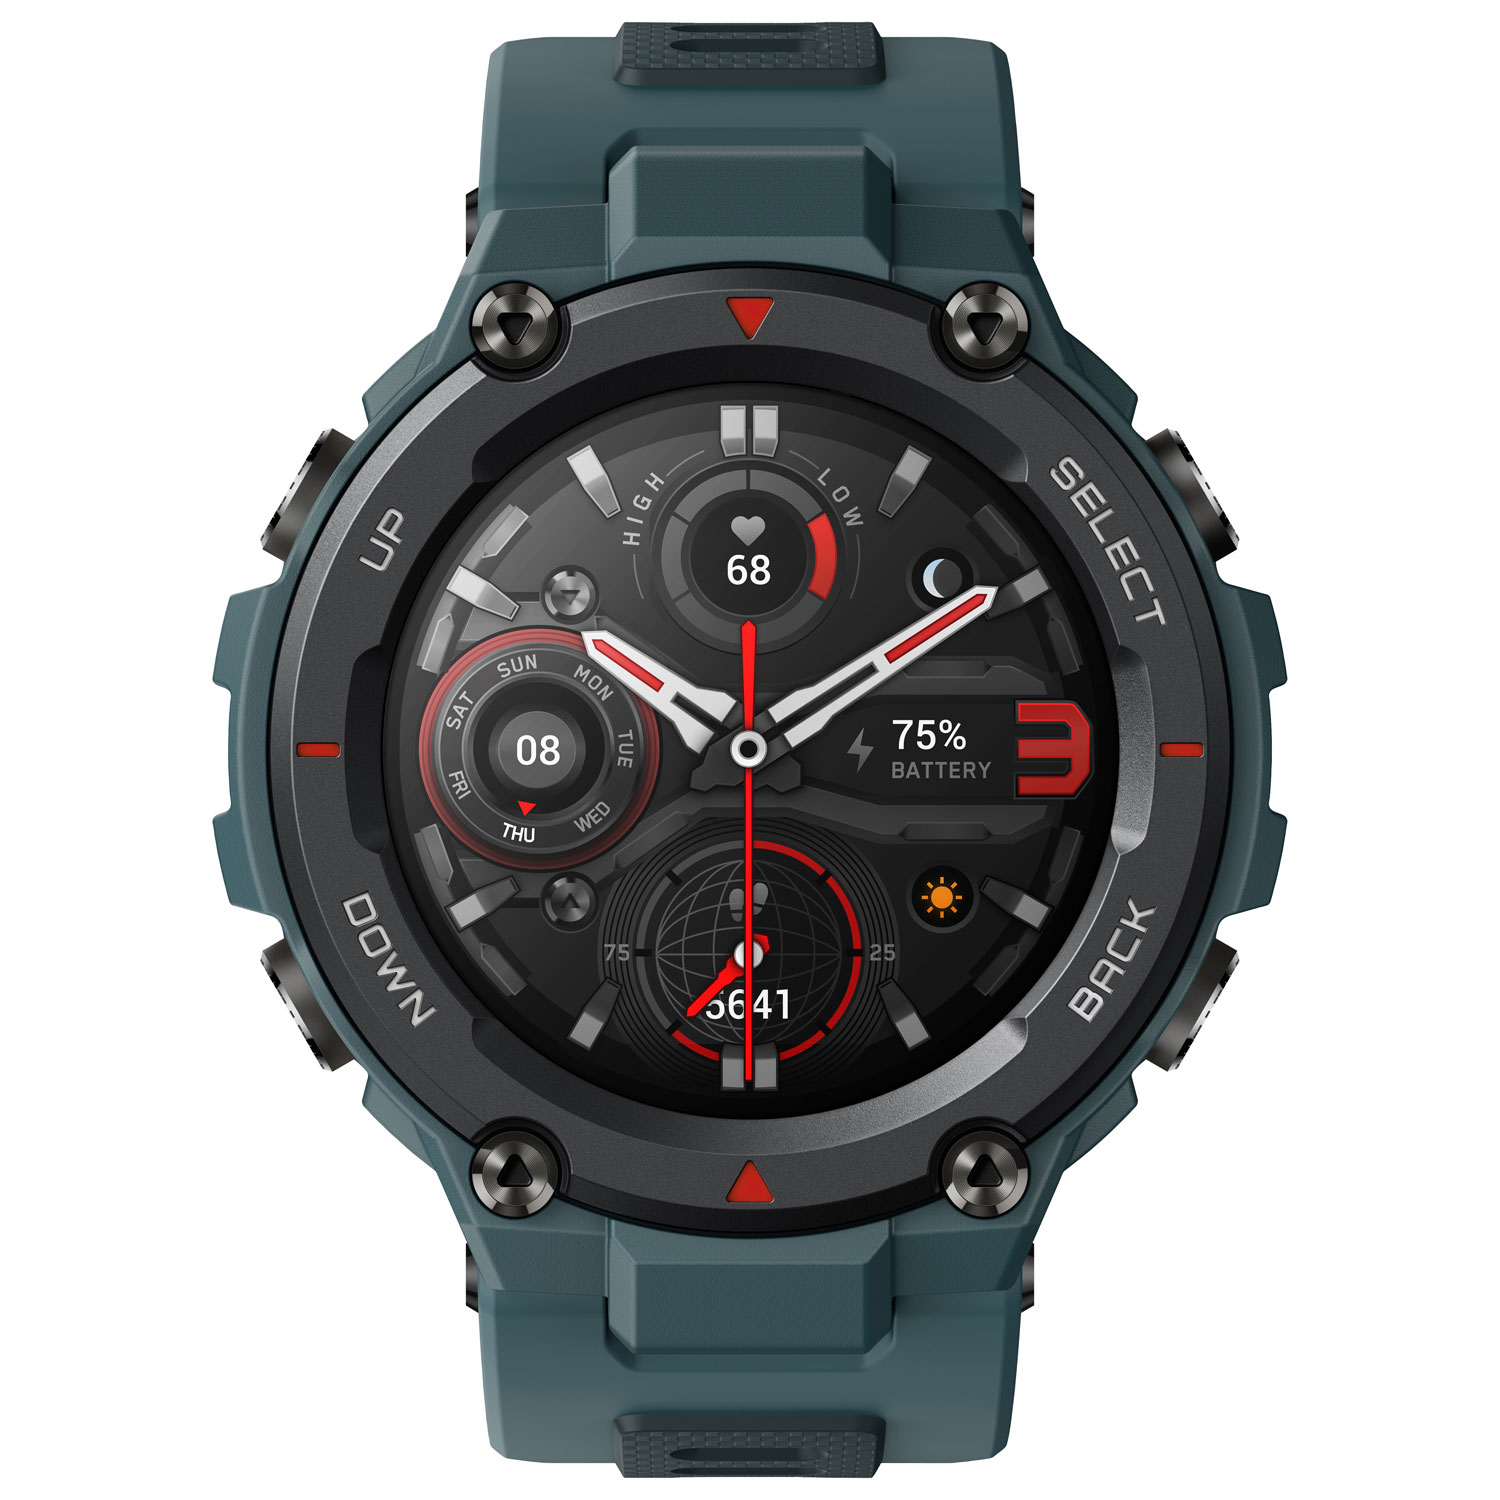 Amazfit T-Rex Pro Smartwatch with Heart Rate Monitor - Blue